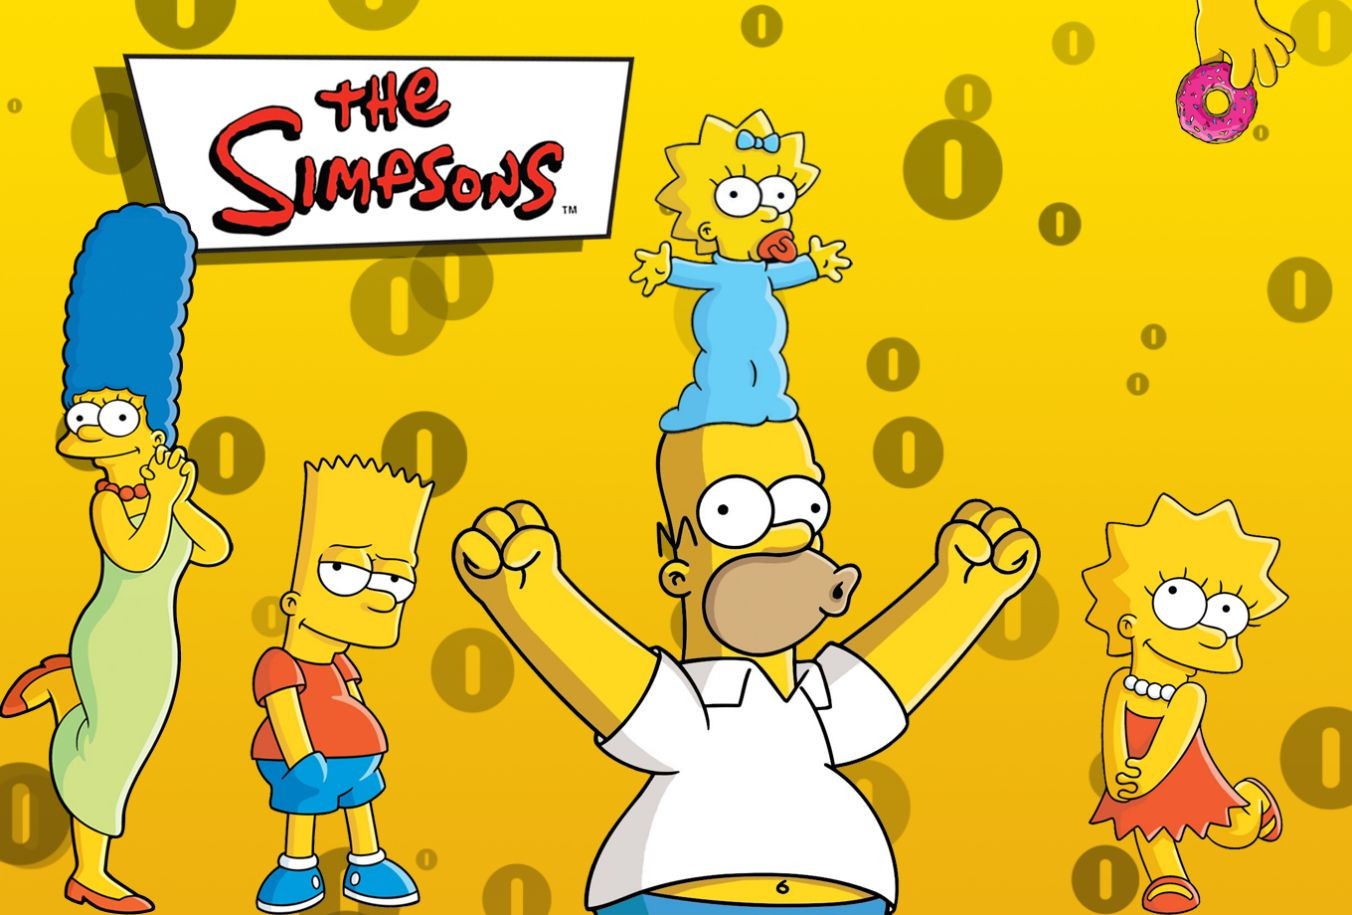 The Simpsons Marge Simpson Bart Simpson Maggie Simpson Homer Simpson Lisa Simpson Wallpaper